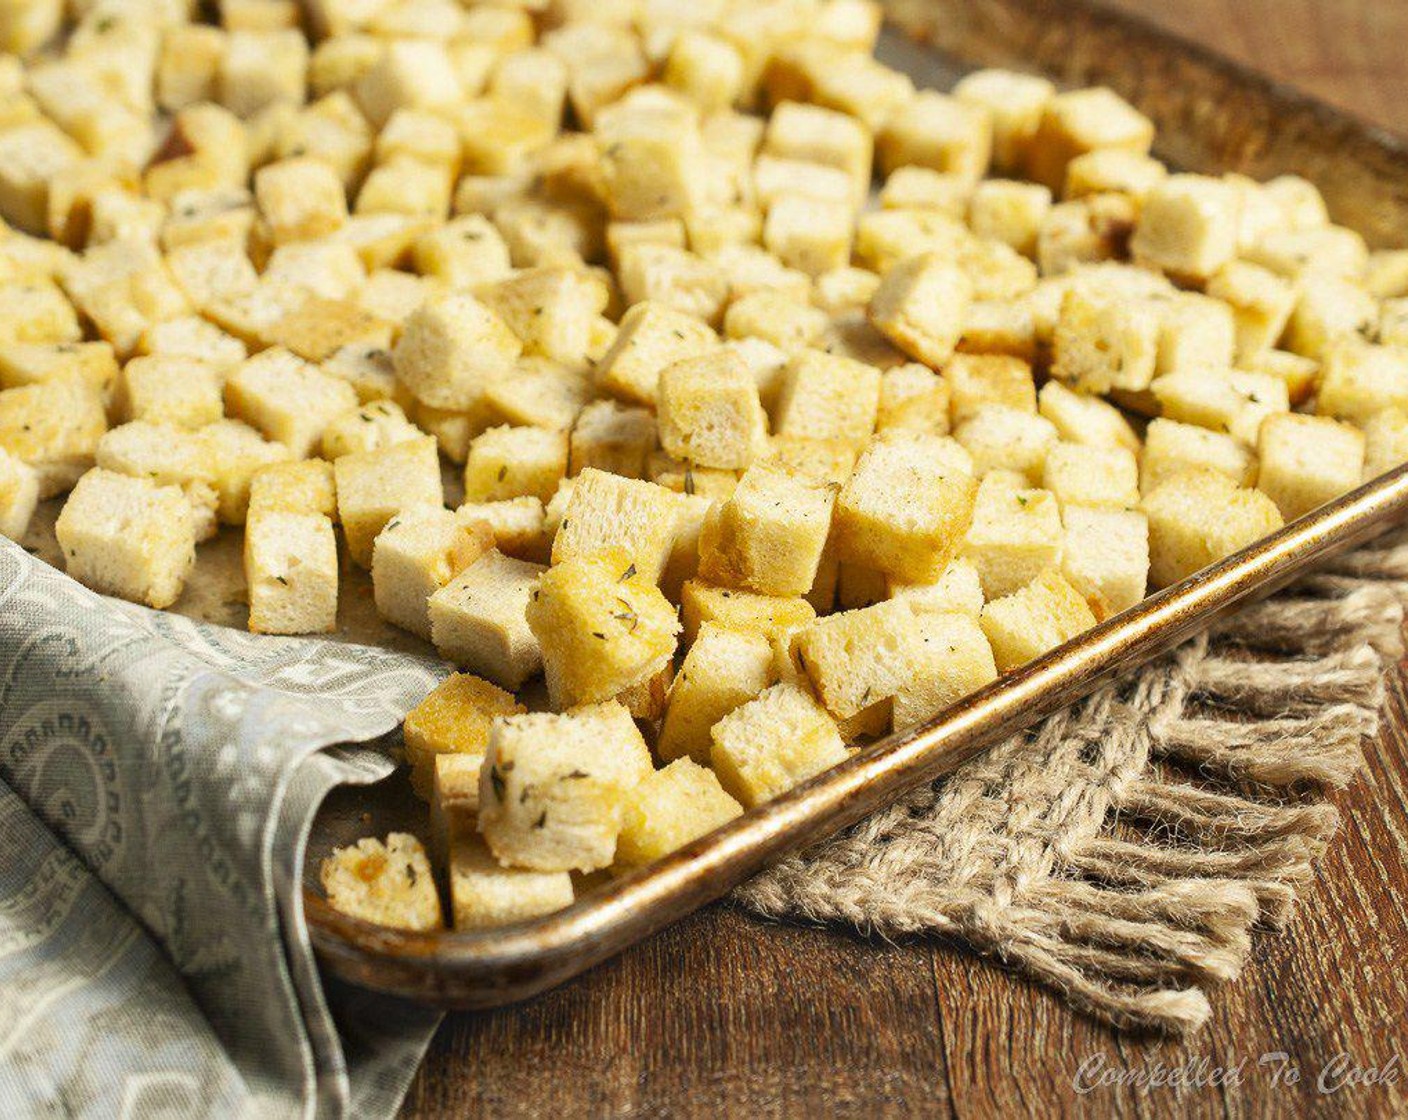 step 5 Spread evenly in a single layer on a large baking tray and bake for 18 to 20 minutes until golden, turning once or twice. Remove from oven and return bread cubes to same large bowl.